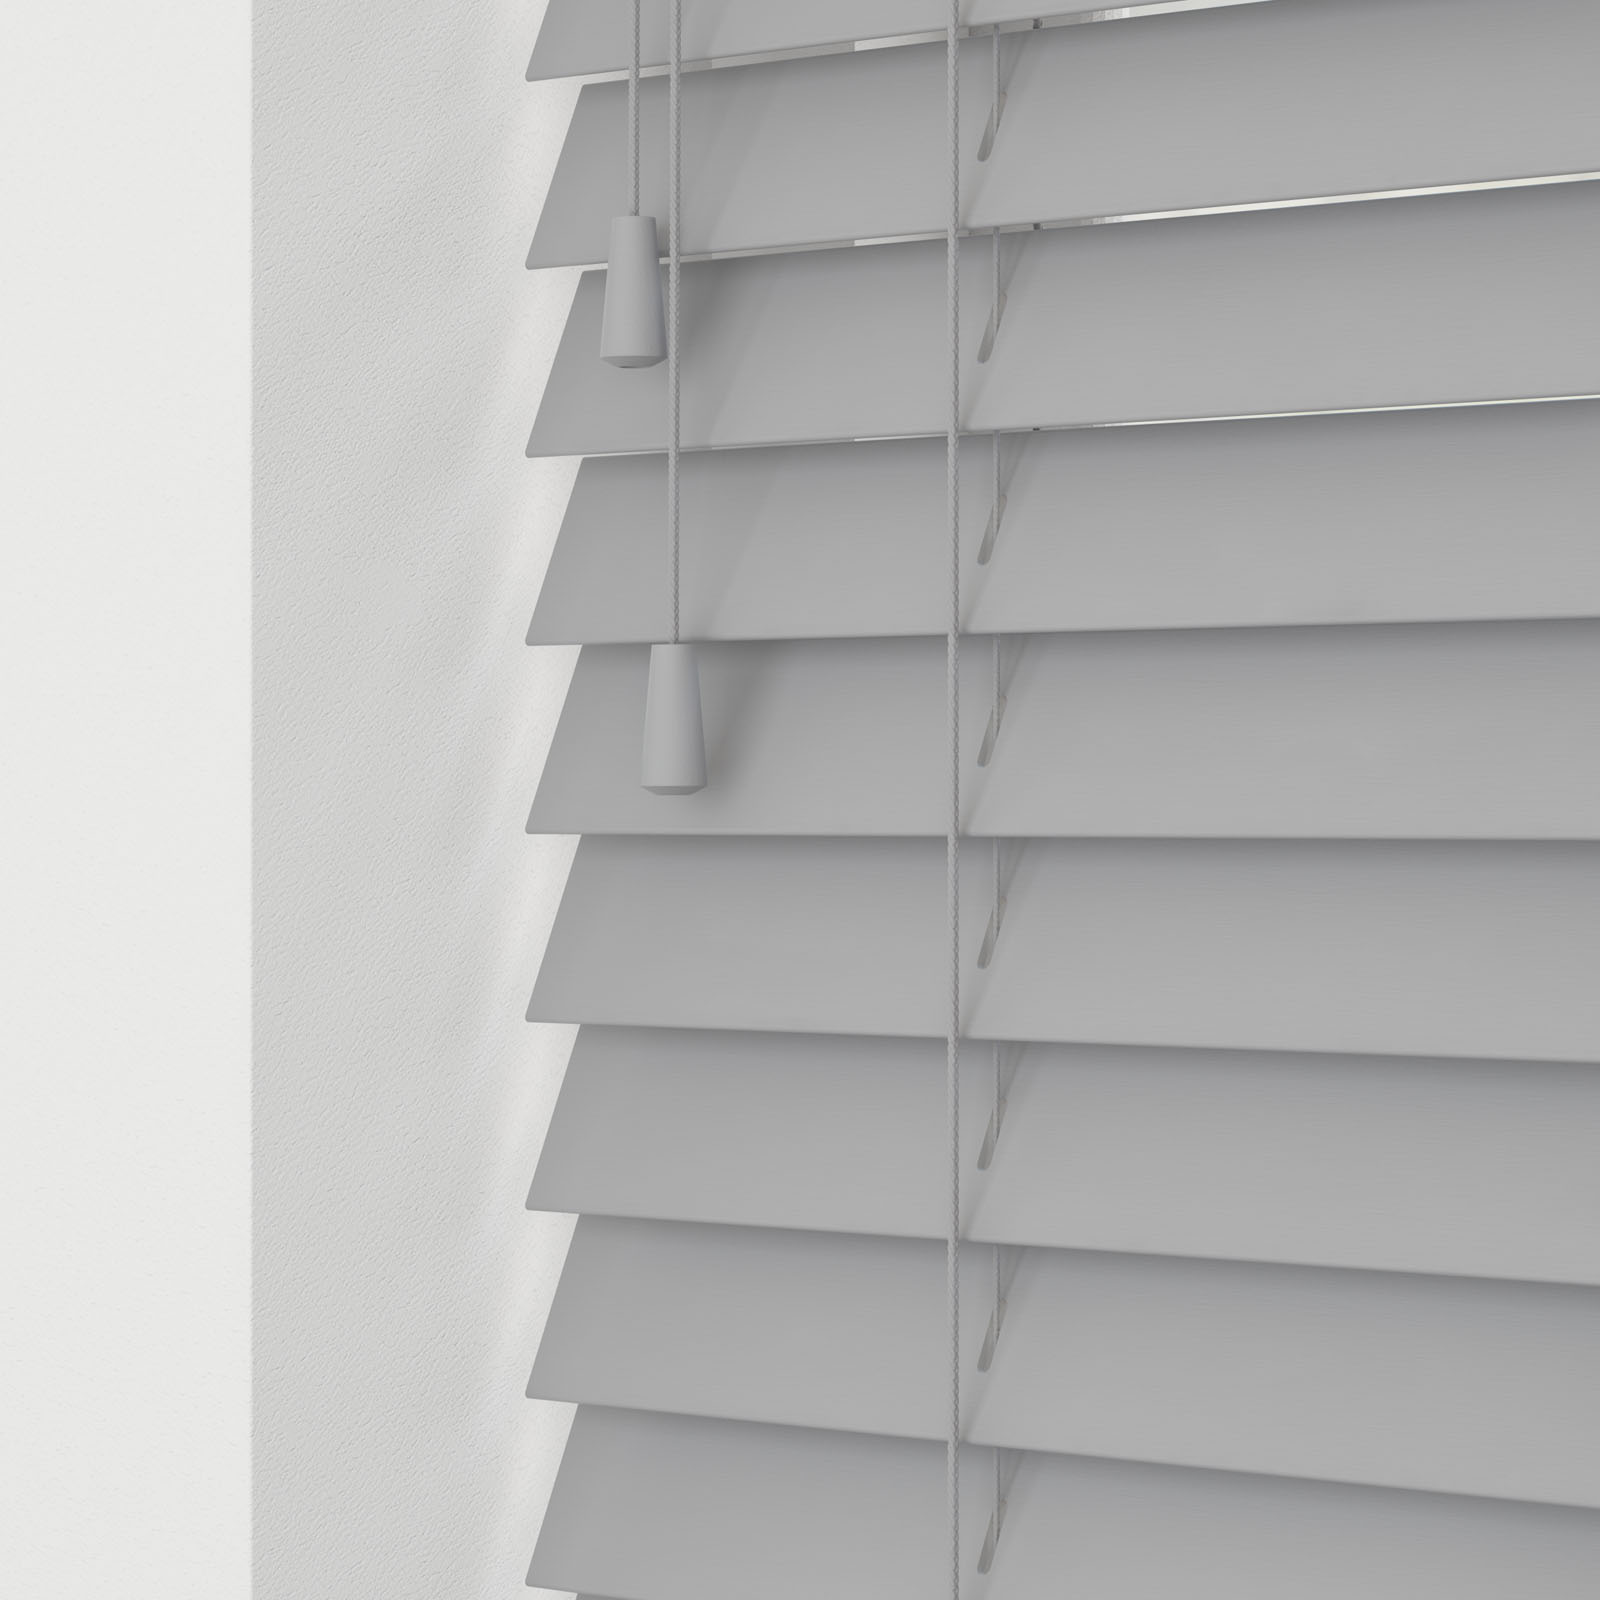 Suppliers of Faux Wood Venetian Blinds